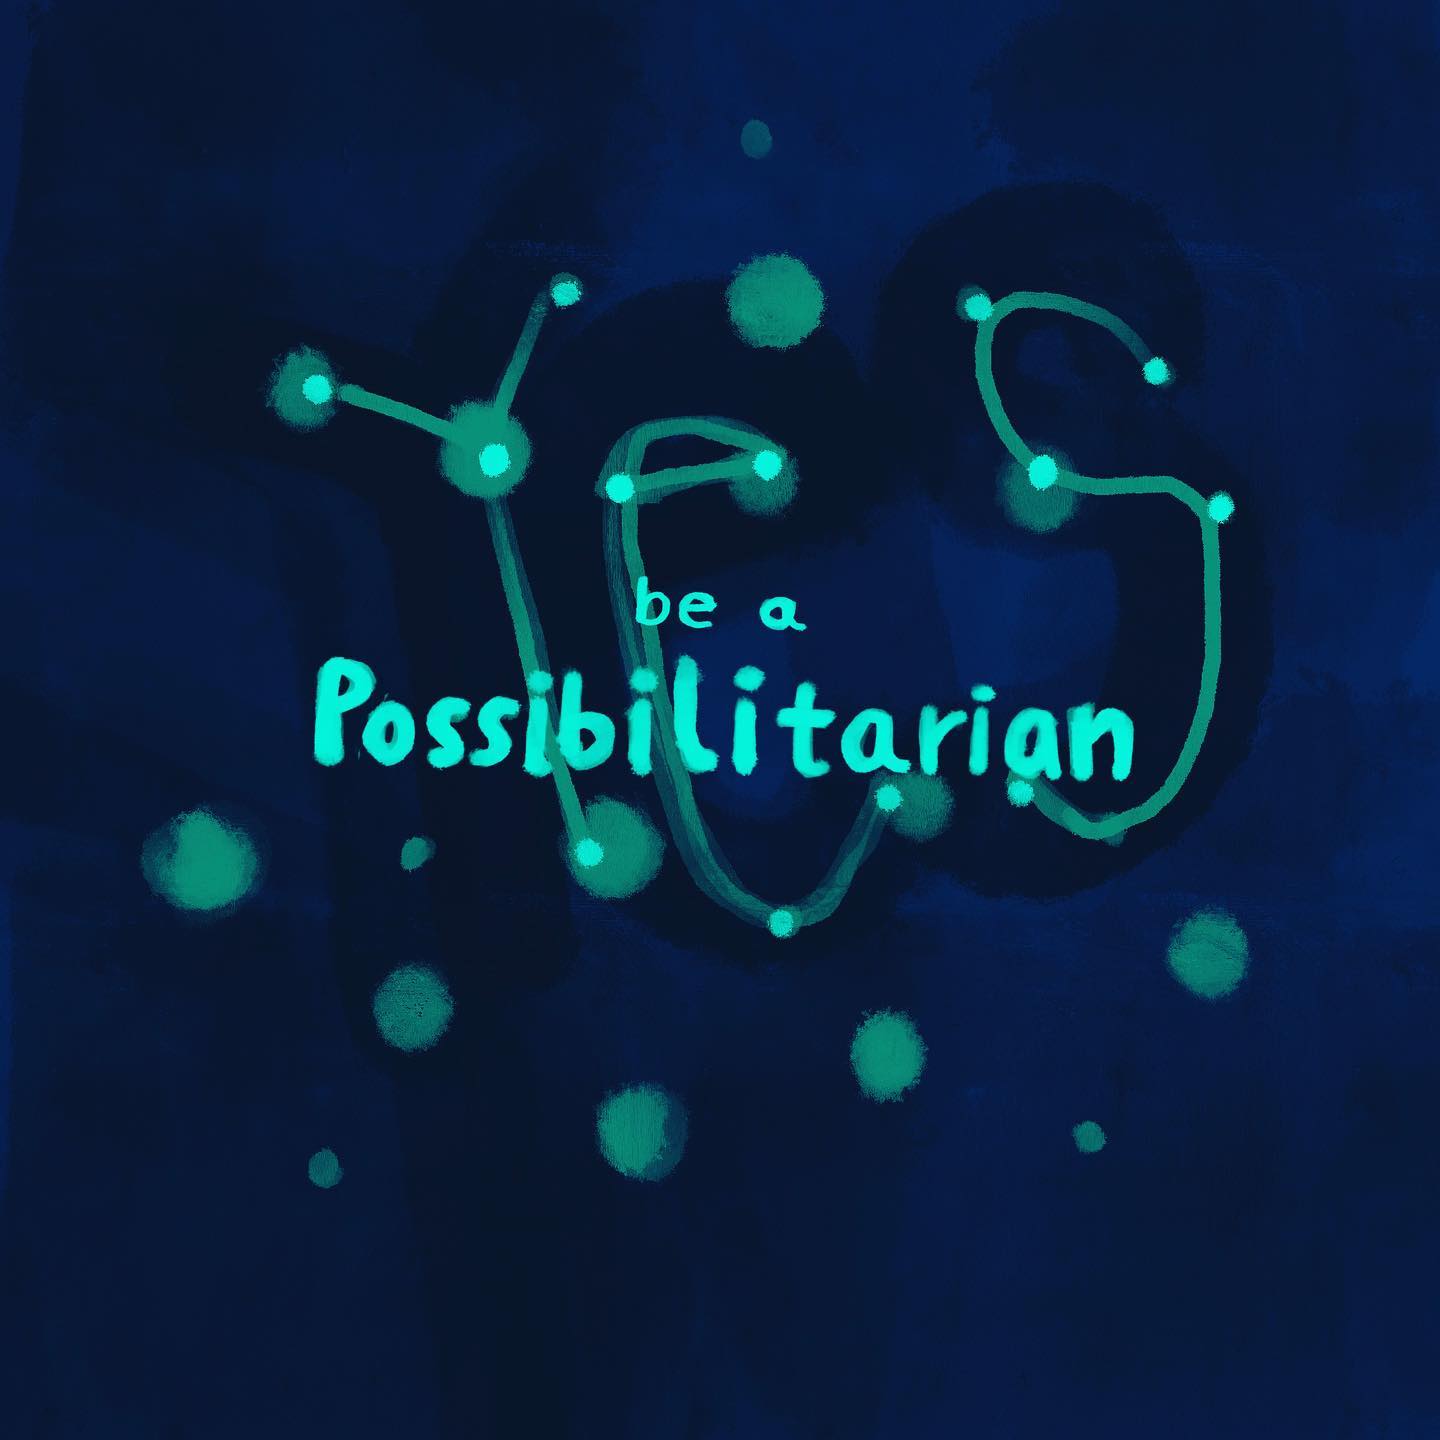 Believe in possibilities. Look for the light. Be the light. Be a possibilitarian.